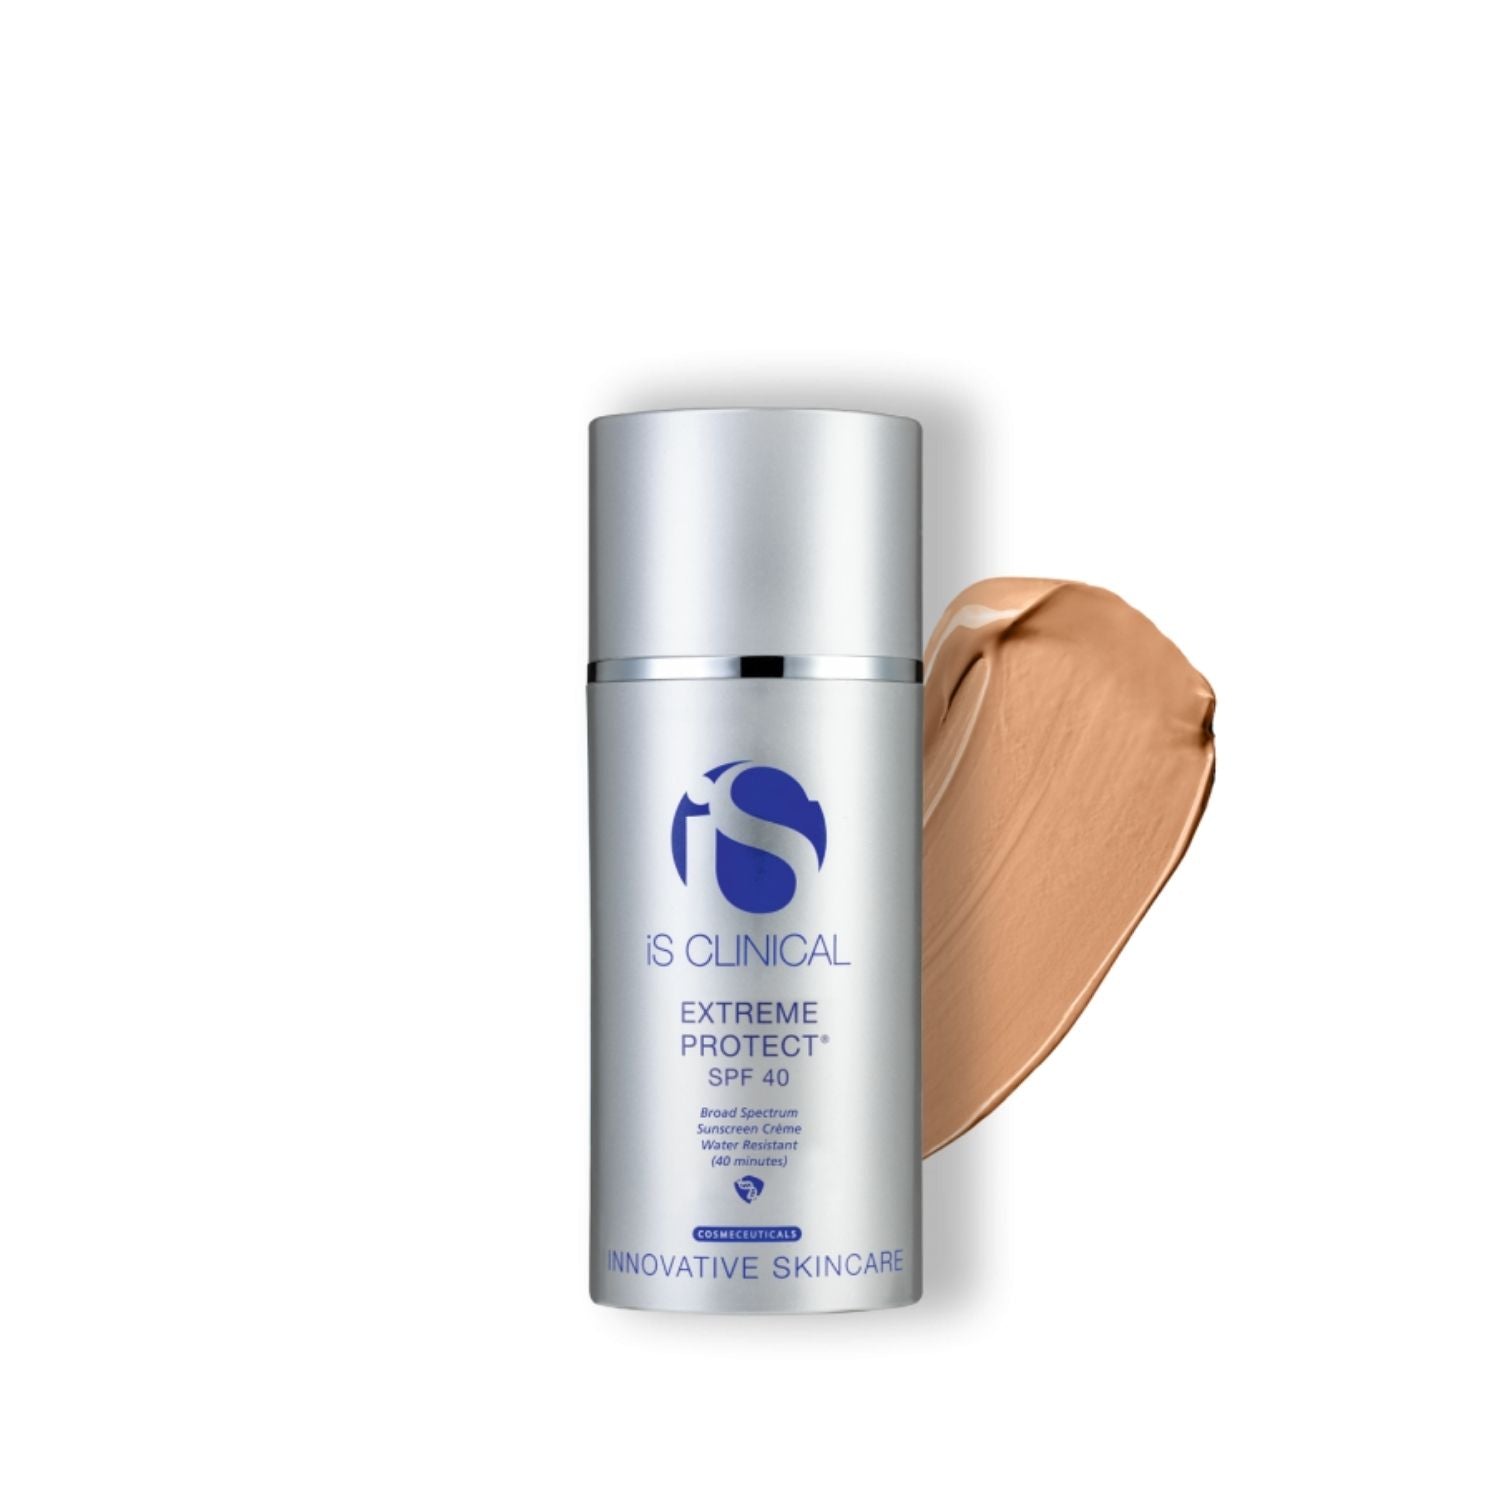 iS Clinical Extreme Protect SPF 40 PerfecTint Bronze - Dr. Pen Store - iS Clinical Buy Genuine Dr Pen Products with Trust